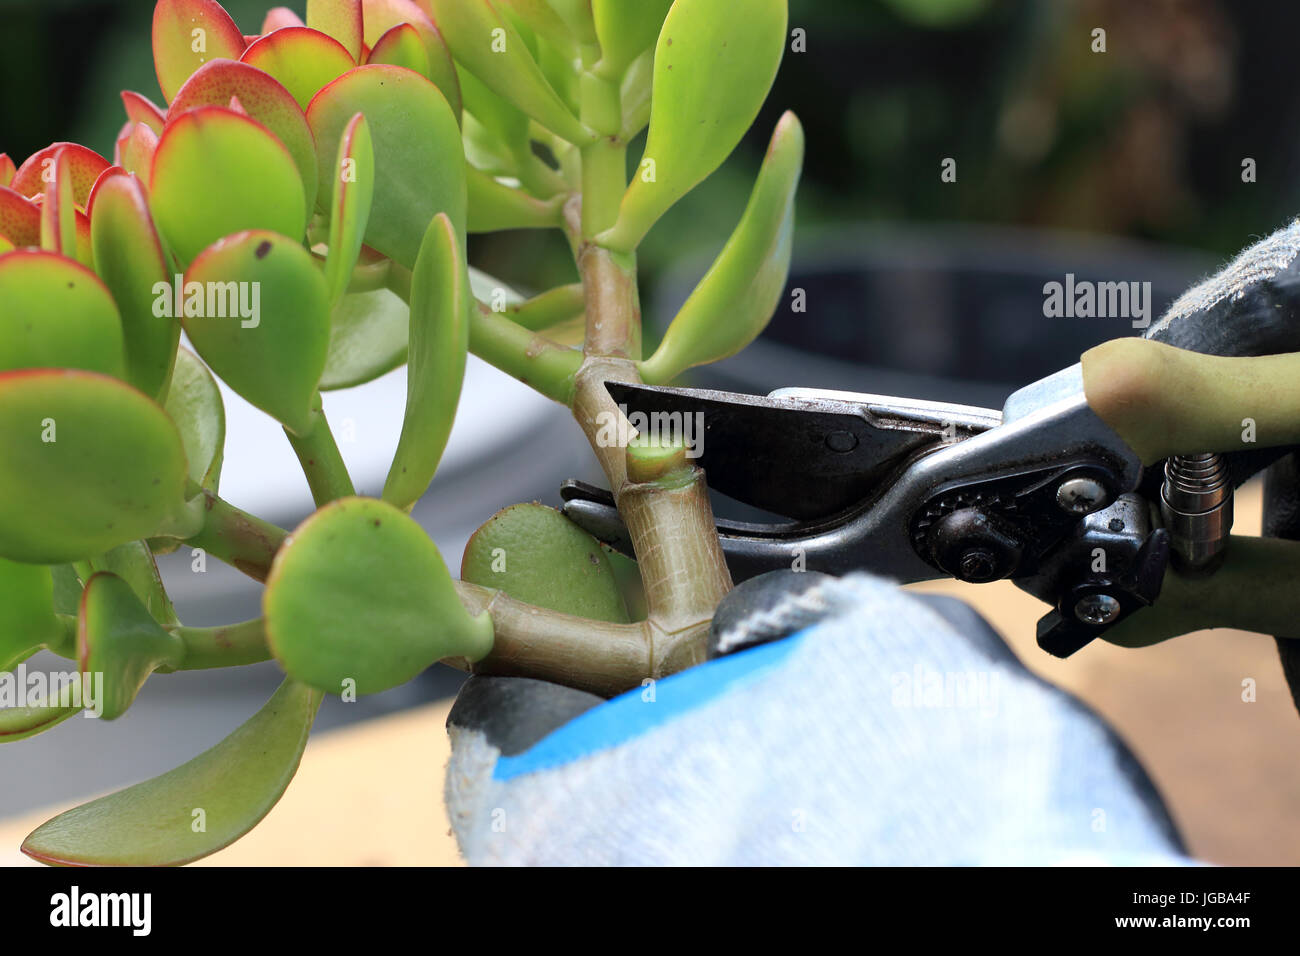 Pruning Crassula ovata or also known as Jade plant Stock Photo